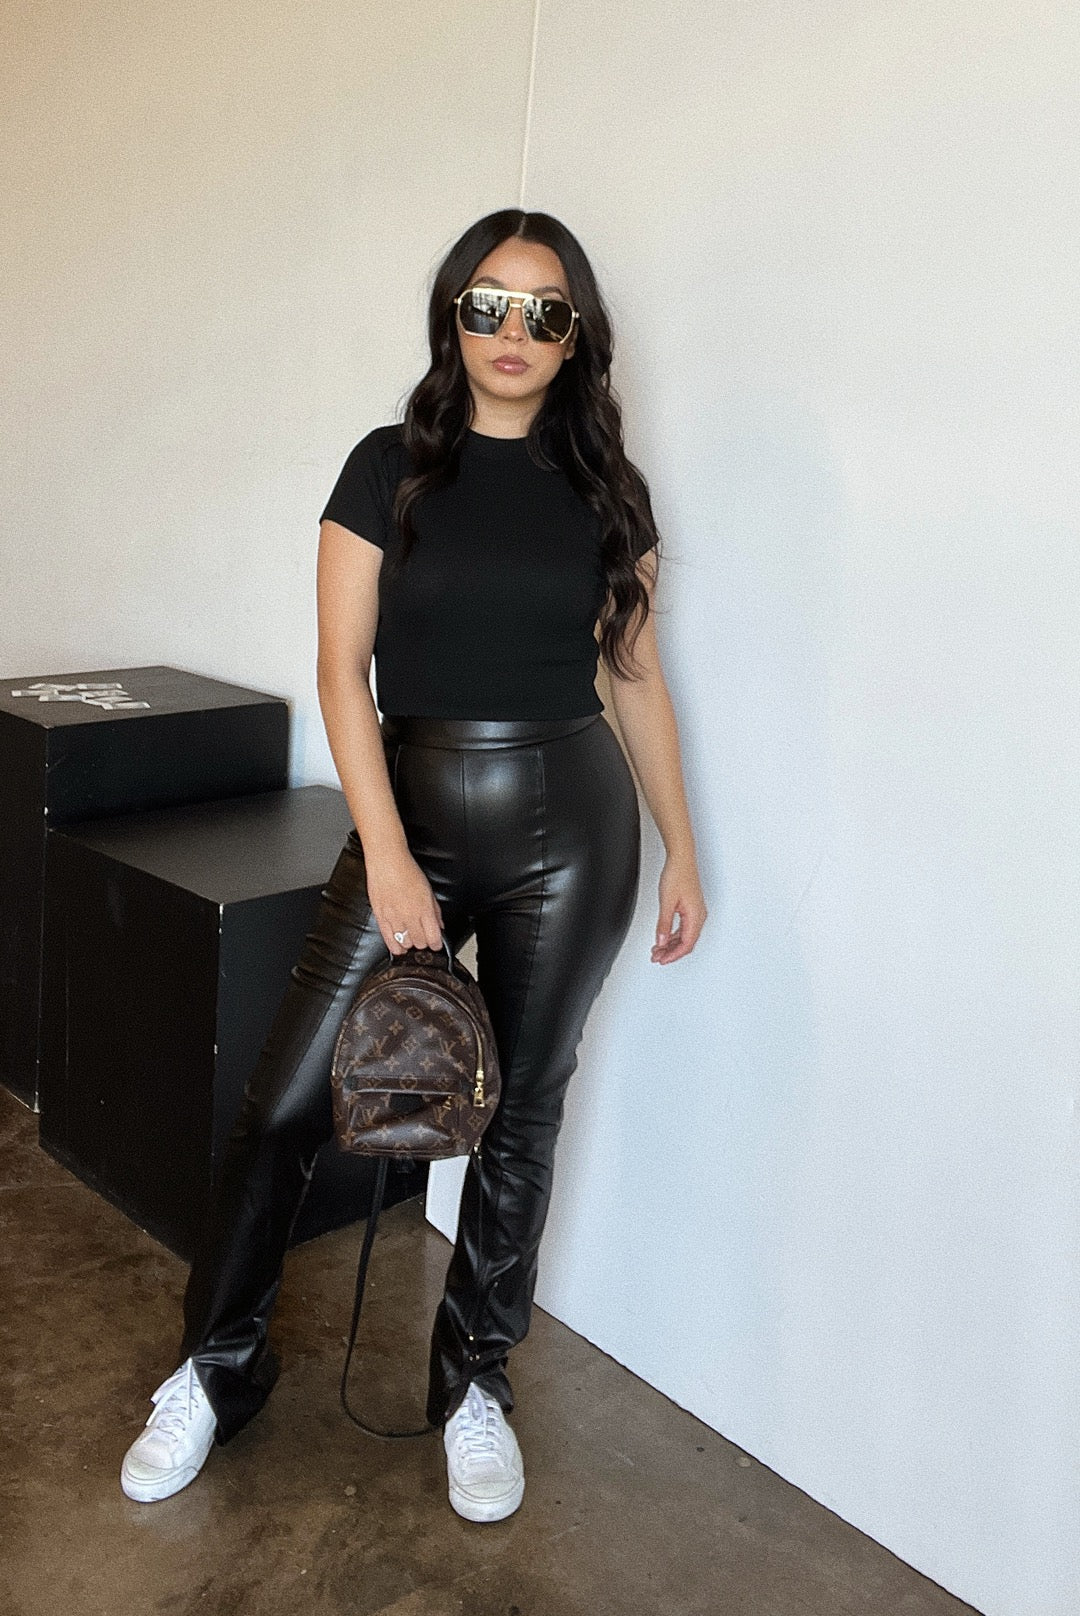 black leather pants - Buy black leather pants product on